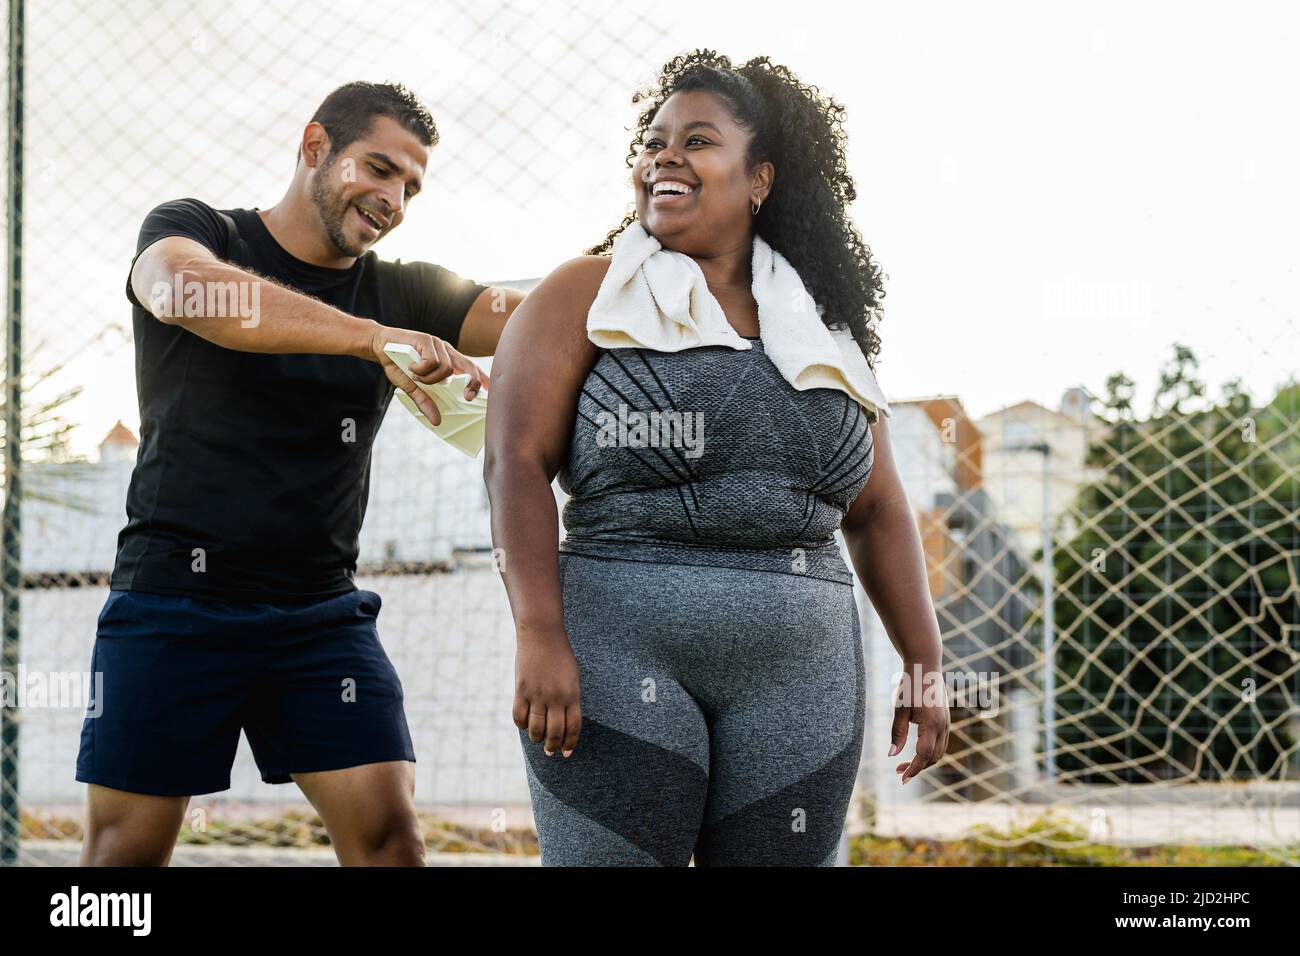 Personal trainer working with curvy woman - Sport people lifestyle concept Stock Photo